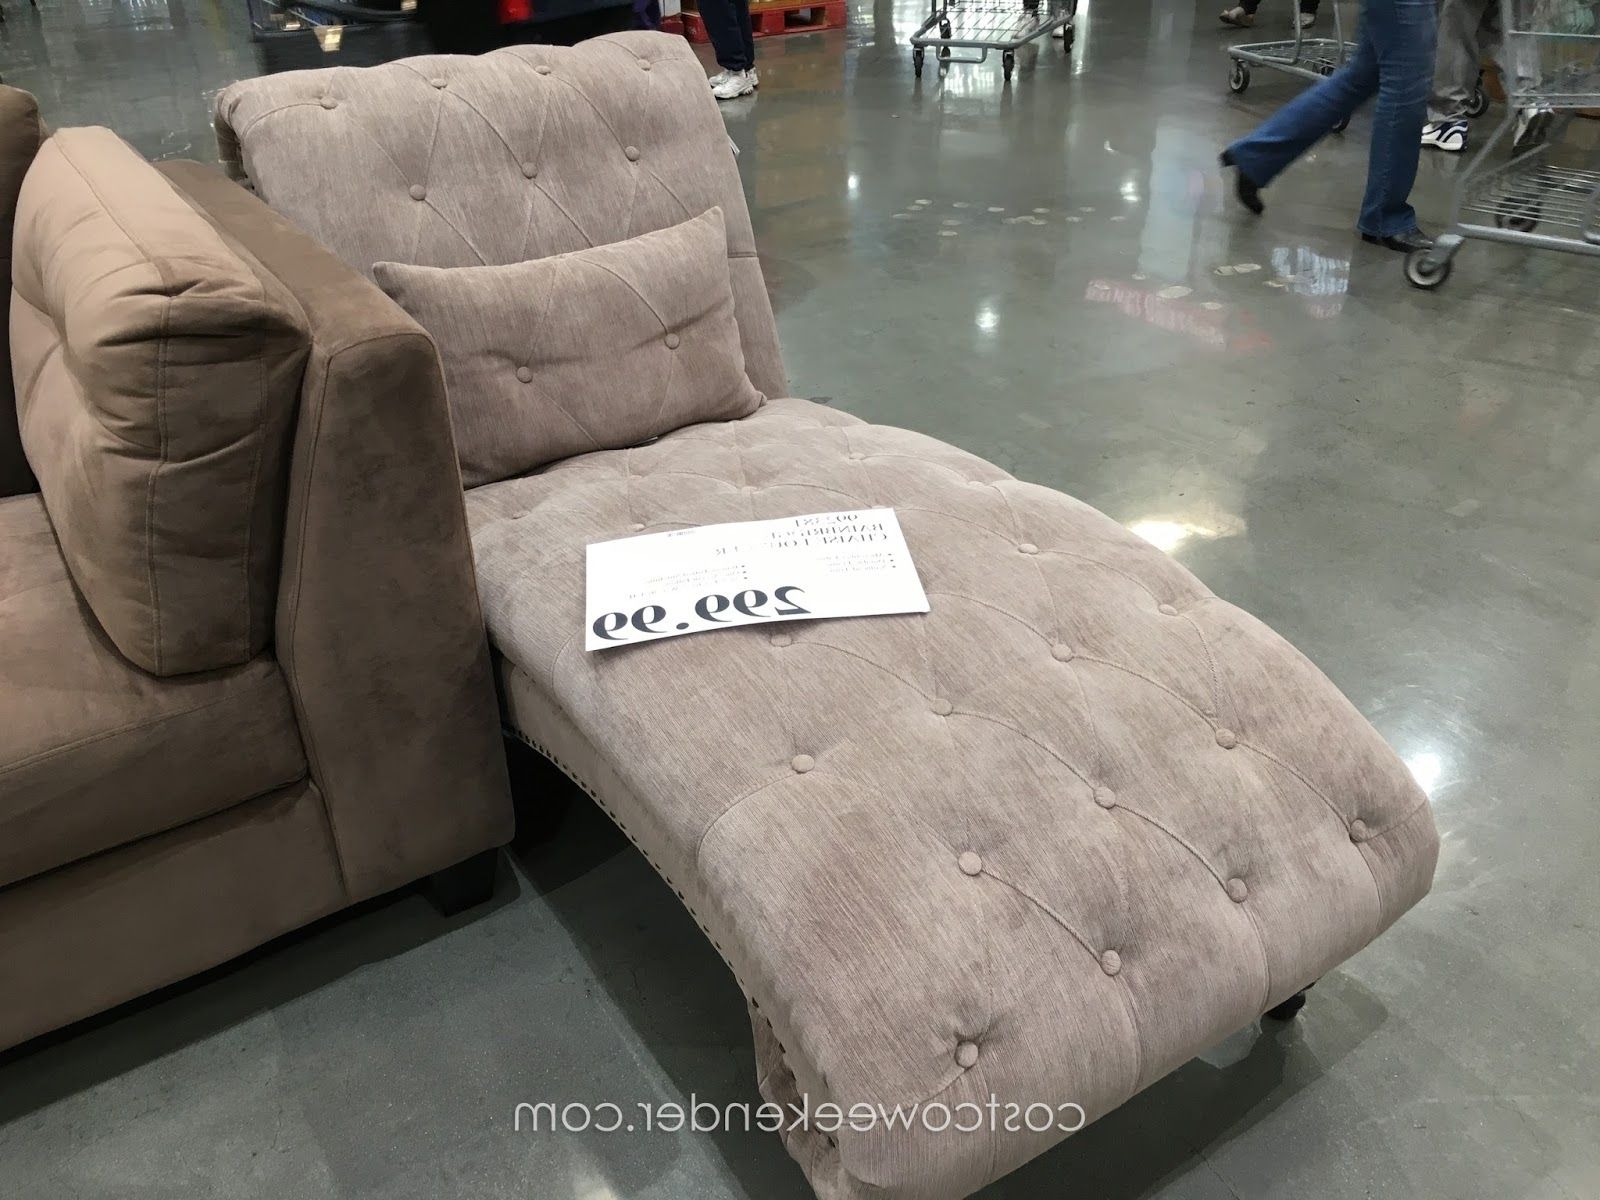 Costco Chaise Lounges Regarding Current Furniture: Costco Lounge Chairs For Enhanced Comfort (View 7 of 15)